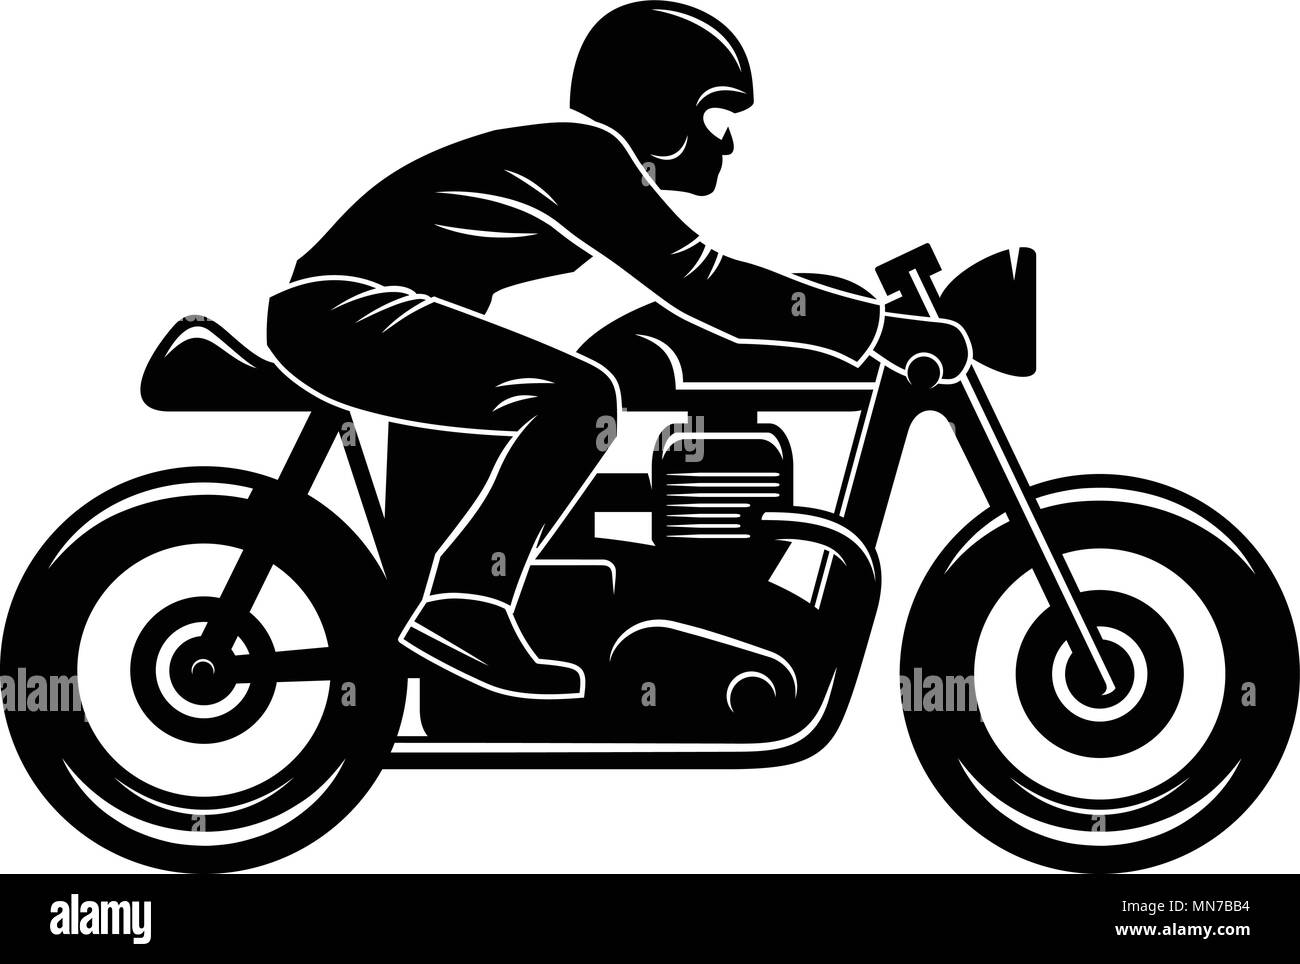 Motorcycle rider Black and White Stock Photos & Images - Alamy